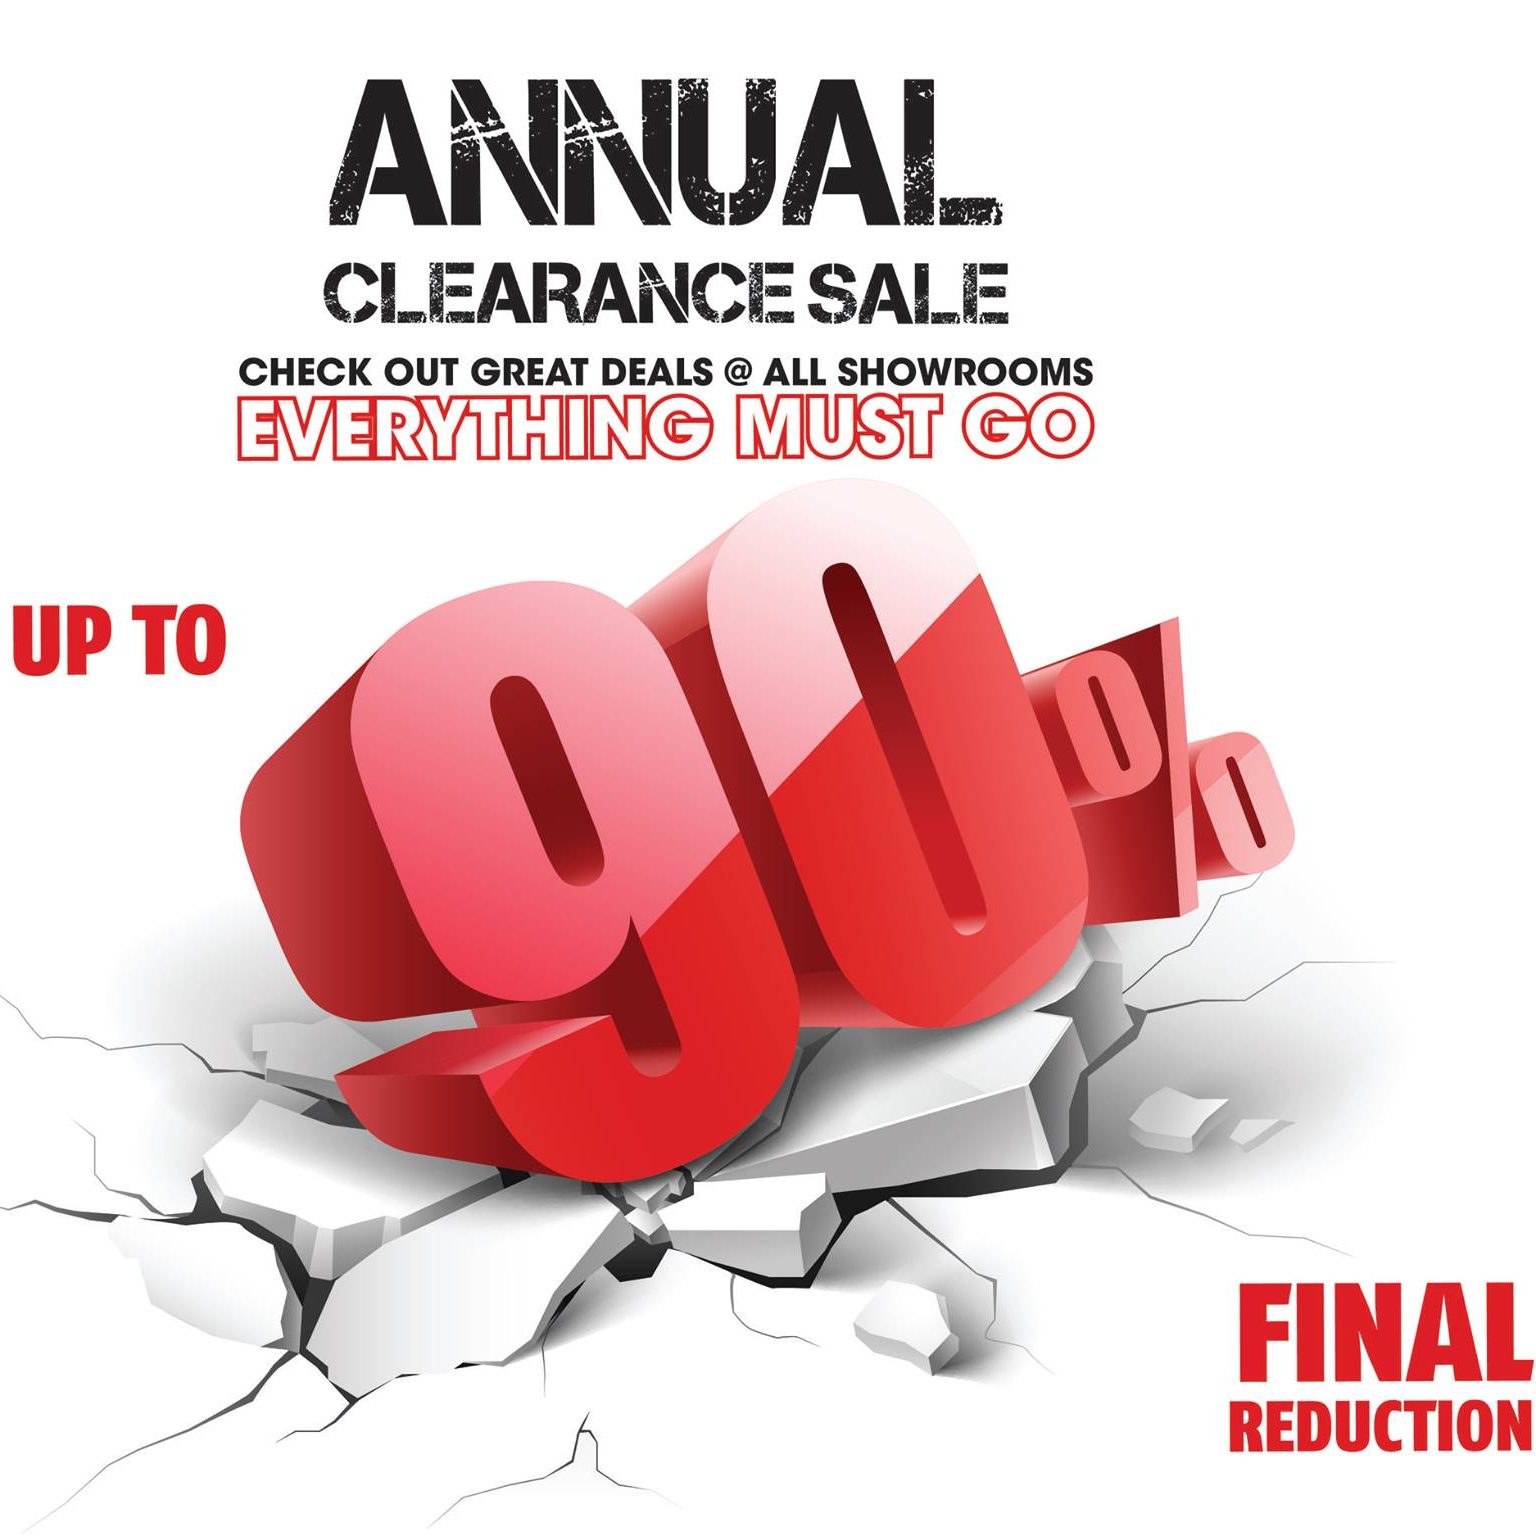 Gain City Singapore Annual Clearance Sale Up to 90% Off Promotion starts 30 Sep 2016